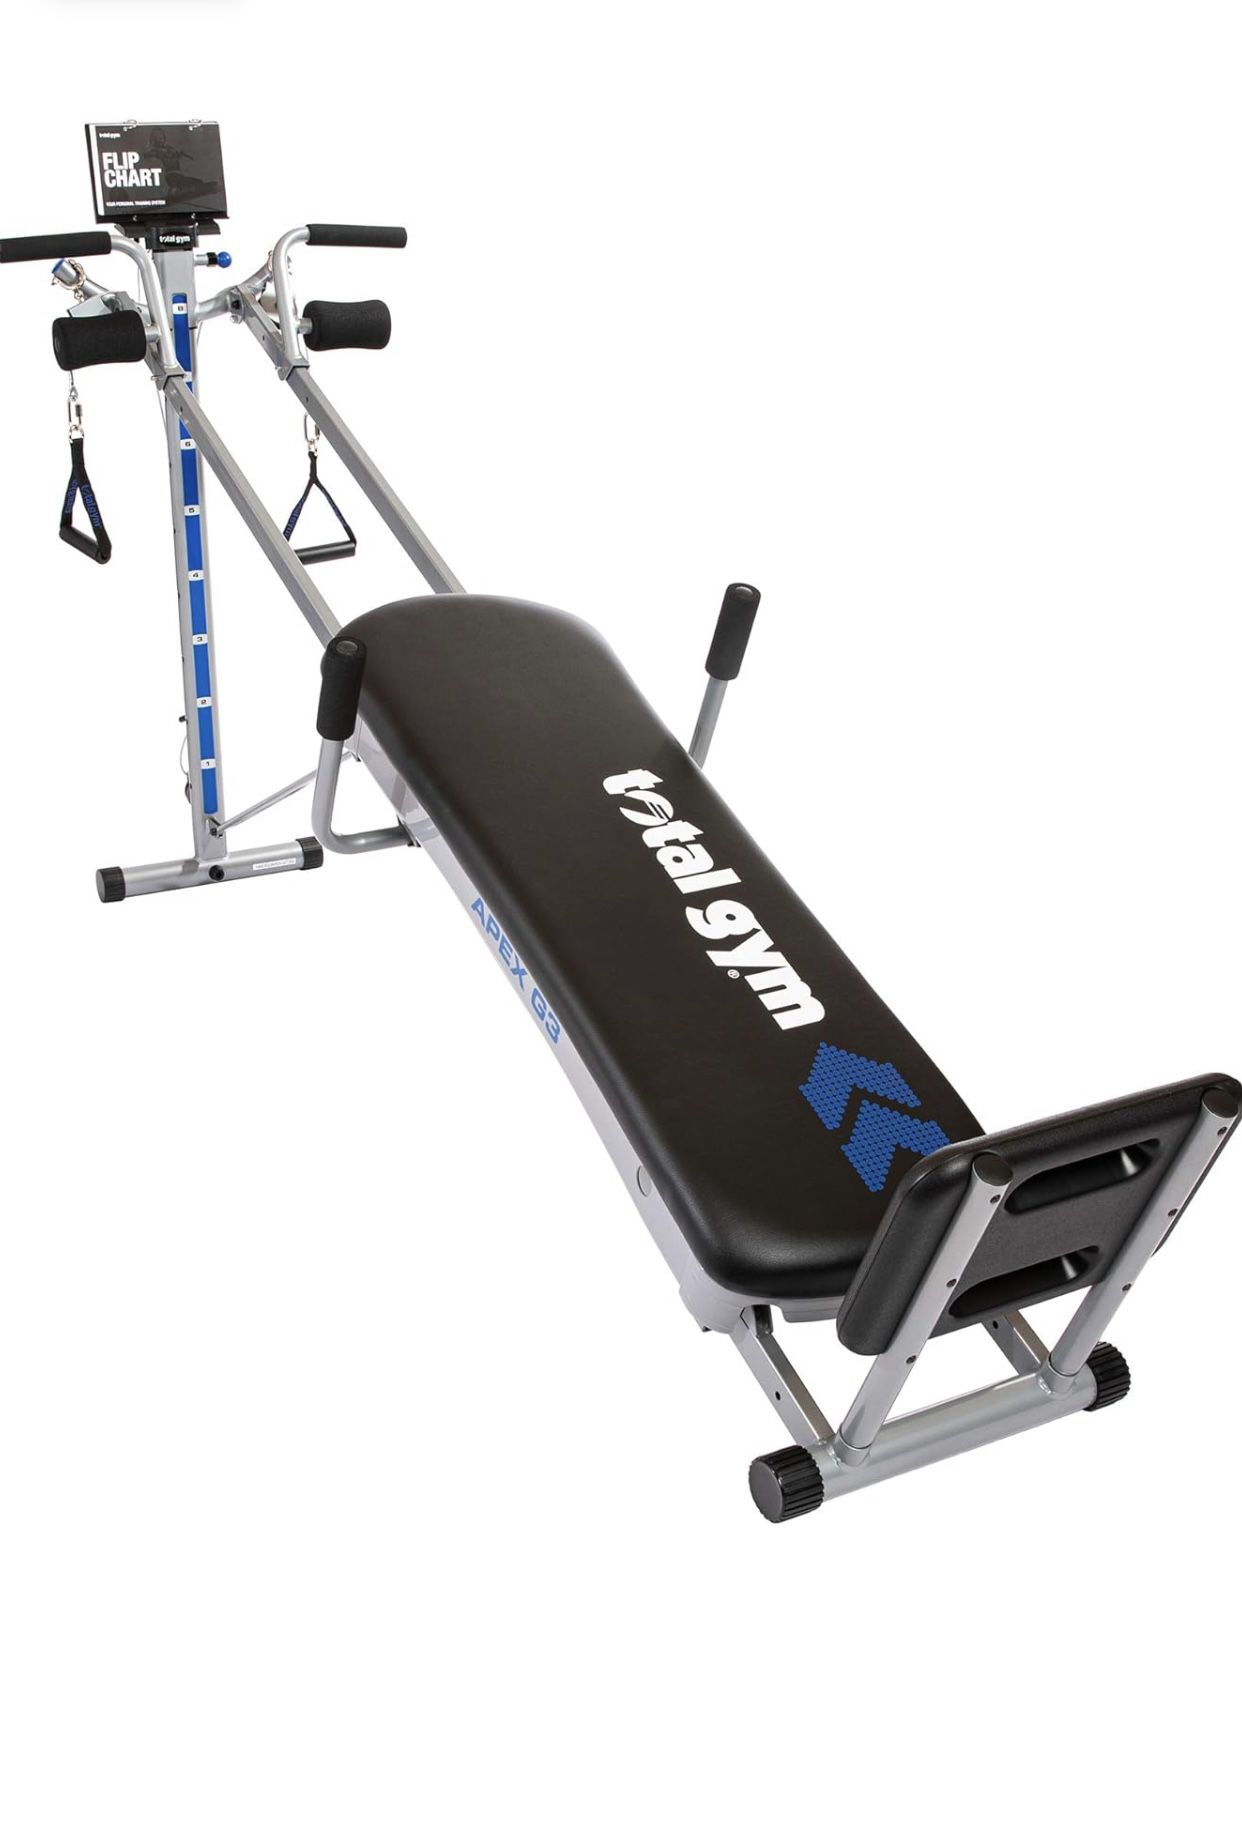 New in box Total Gym APEX G3 Versatile Indoor Home Gym Workout Total Body Strength Training 